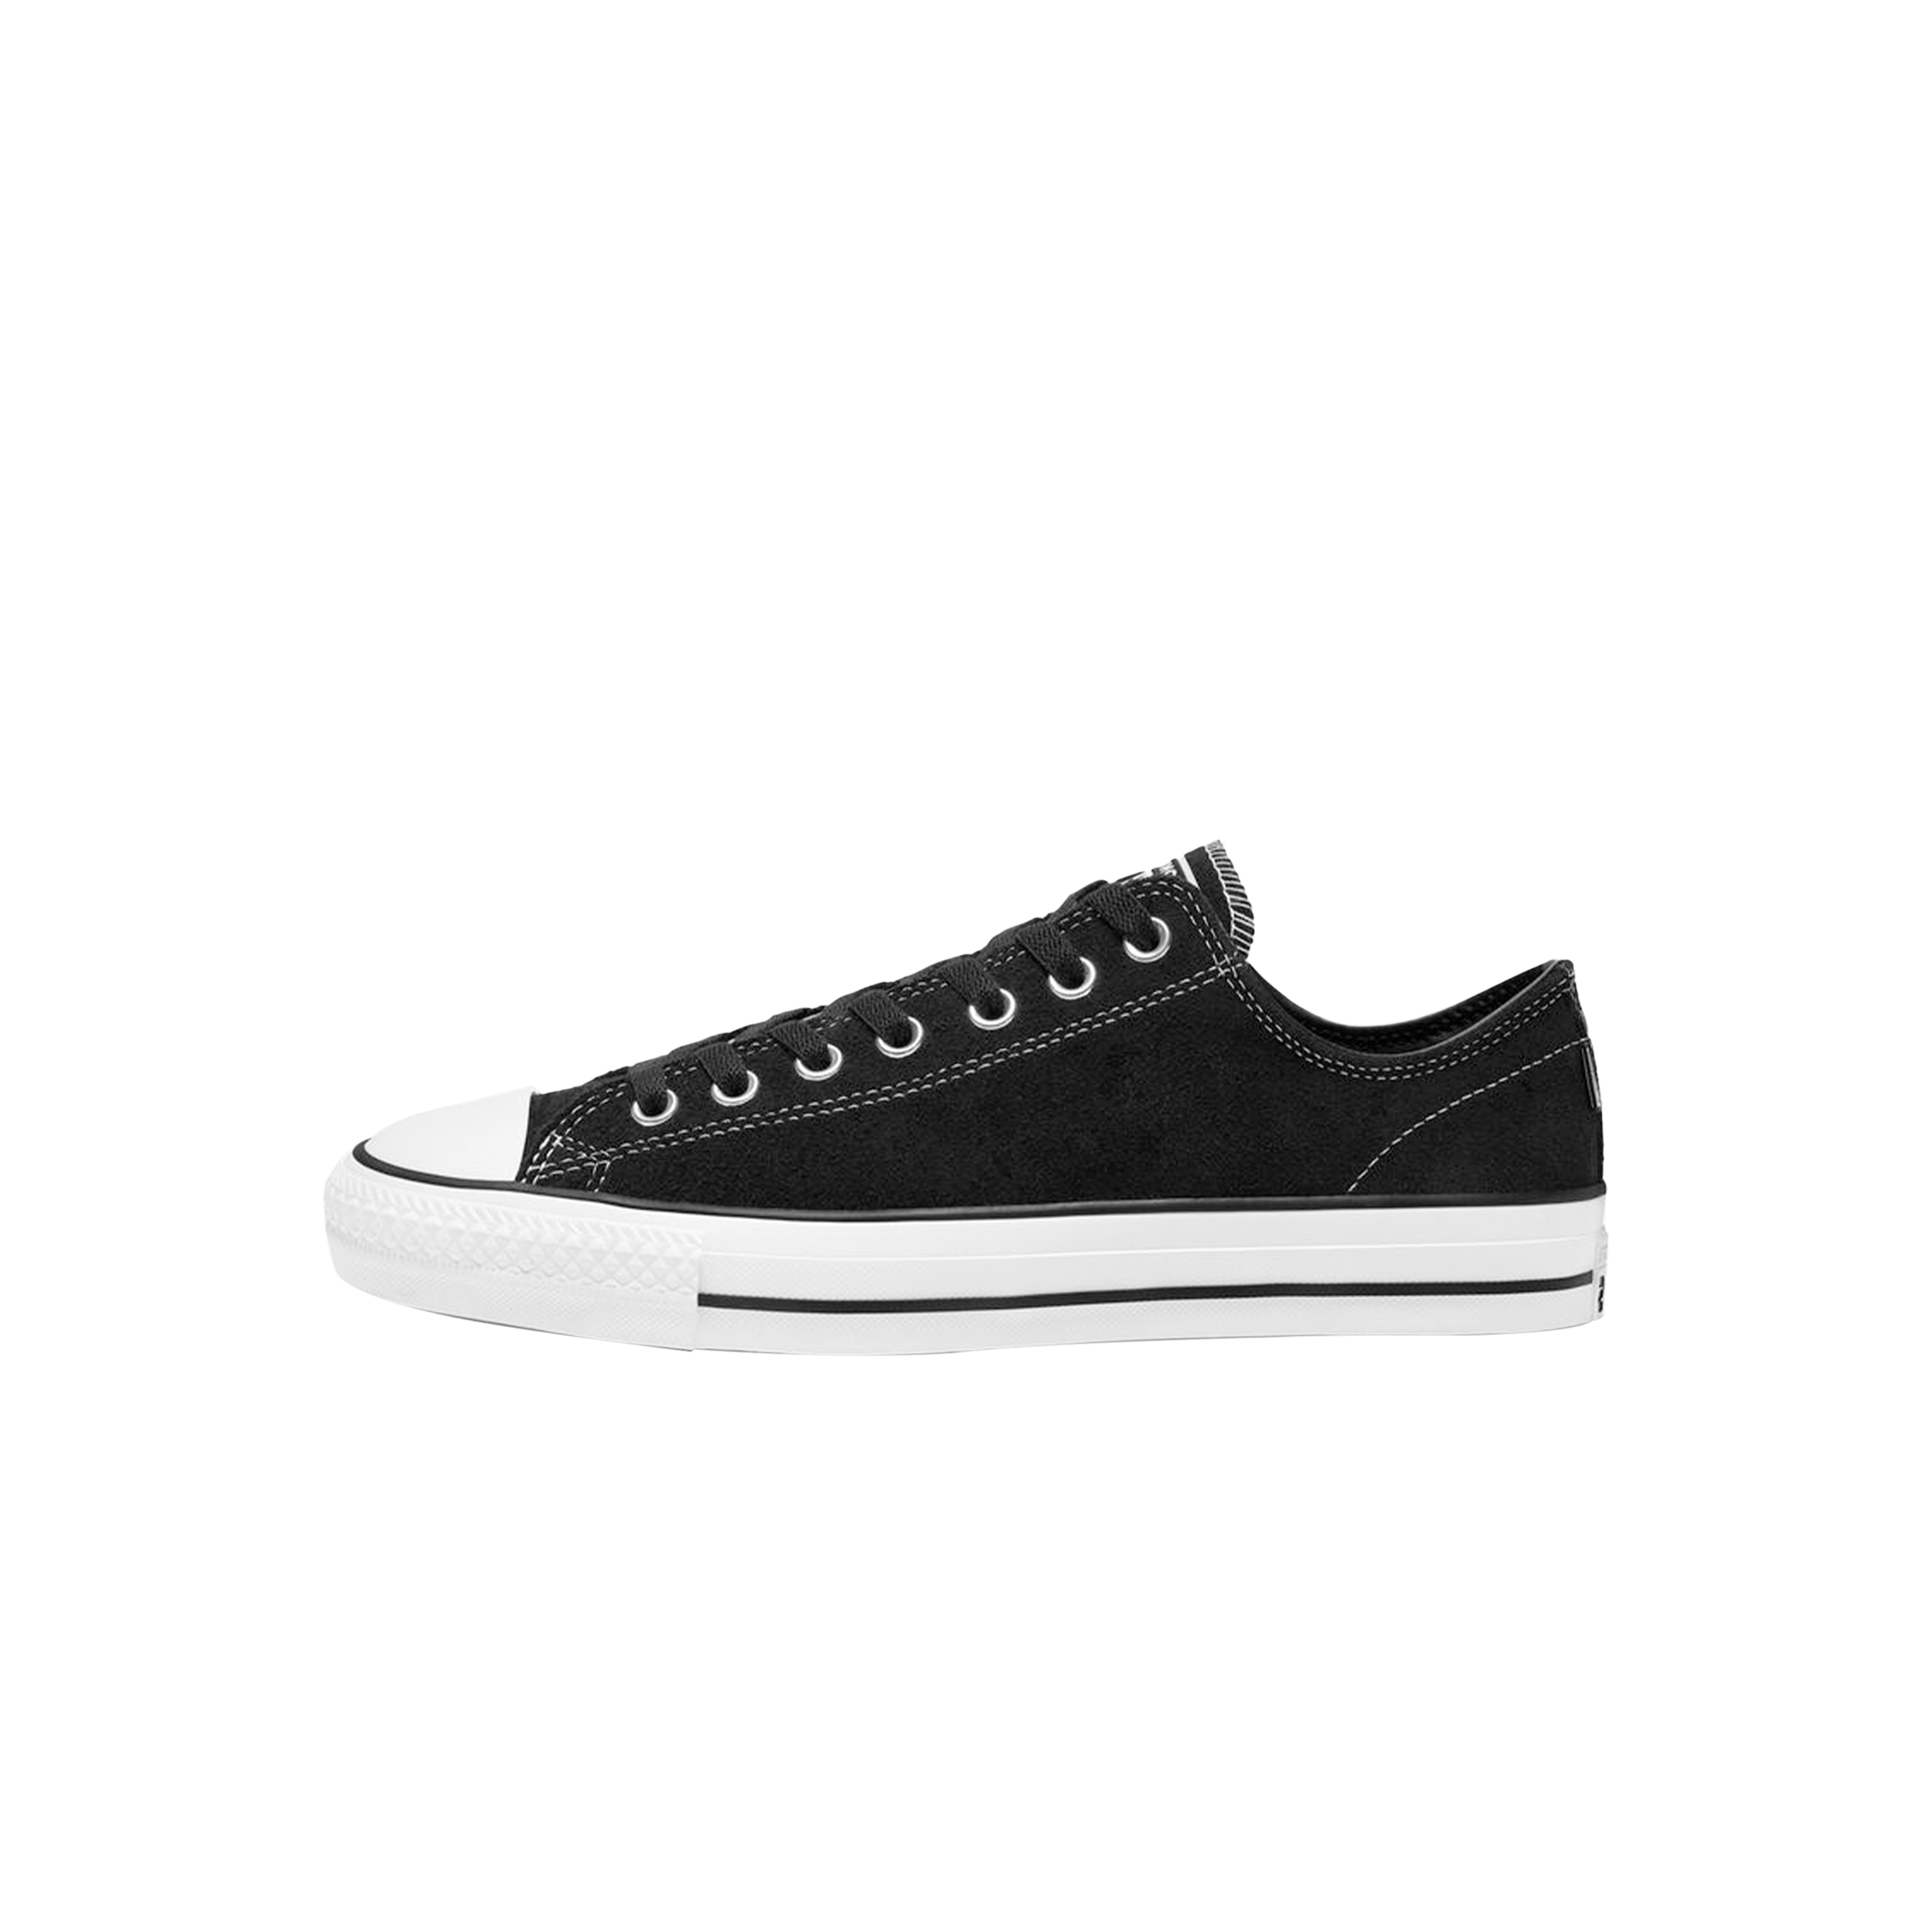 CONS CHUCK TAYLOR ALL STAR PRO SUEDE - Siwilai